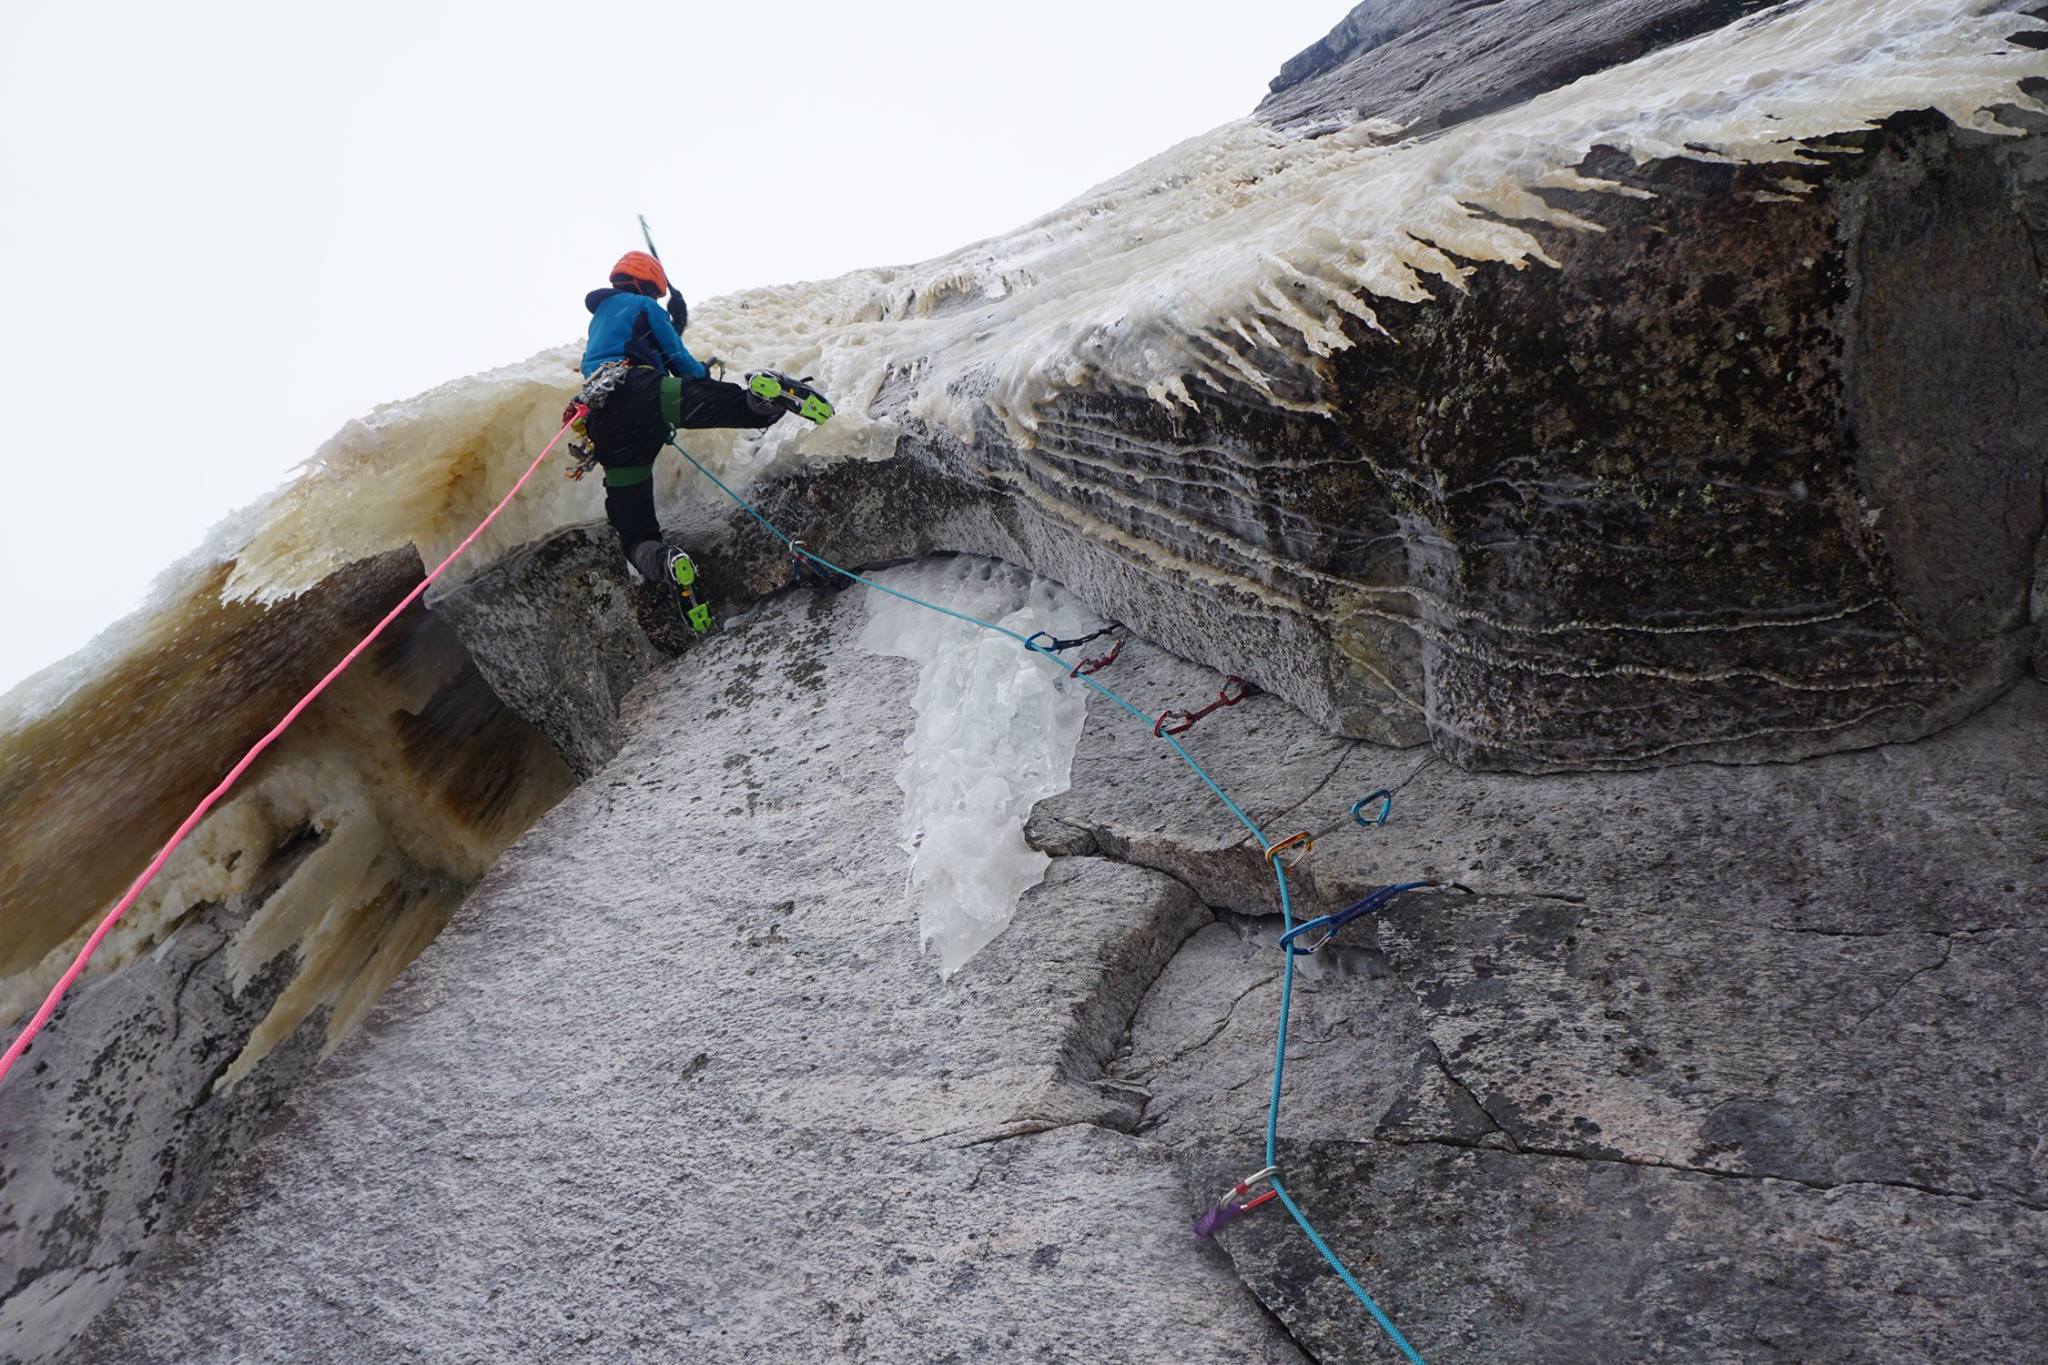 Maarten van Haeren attempting the direct start to Le Chercheur d'Or (M7 WI5, 160m). This first pitch in the mixed incarnation still awaits a redpoint. [Photo] Pete Takeda